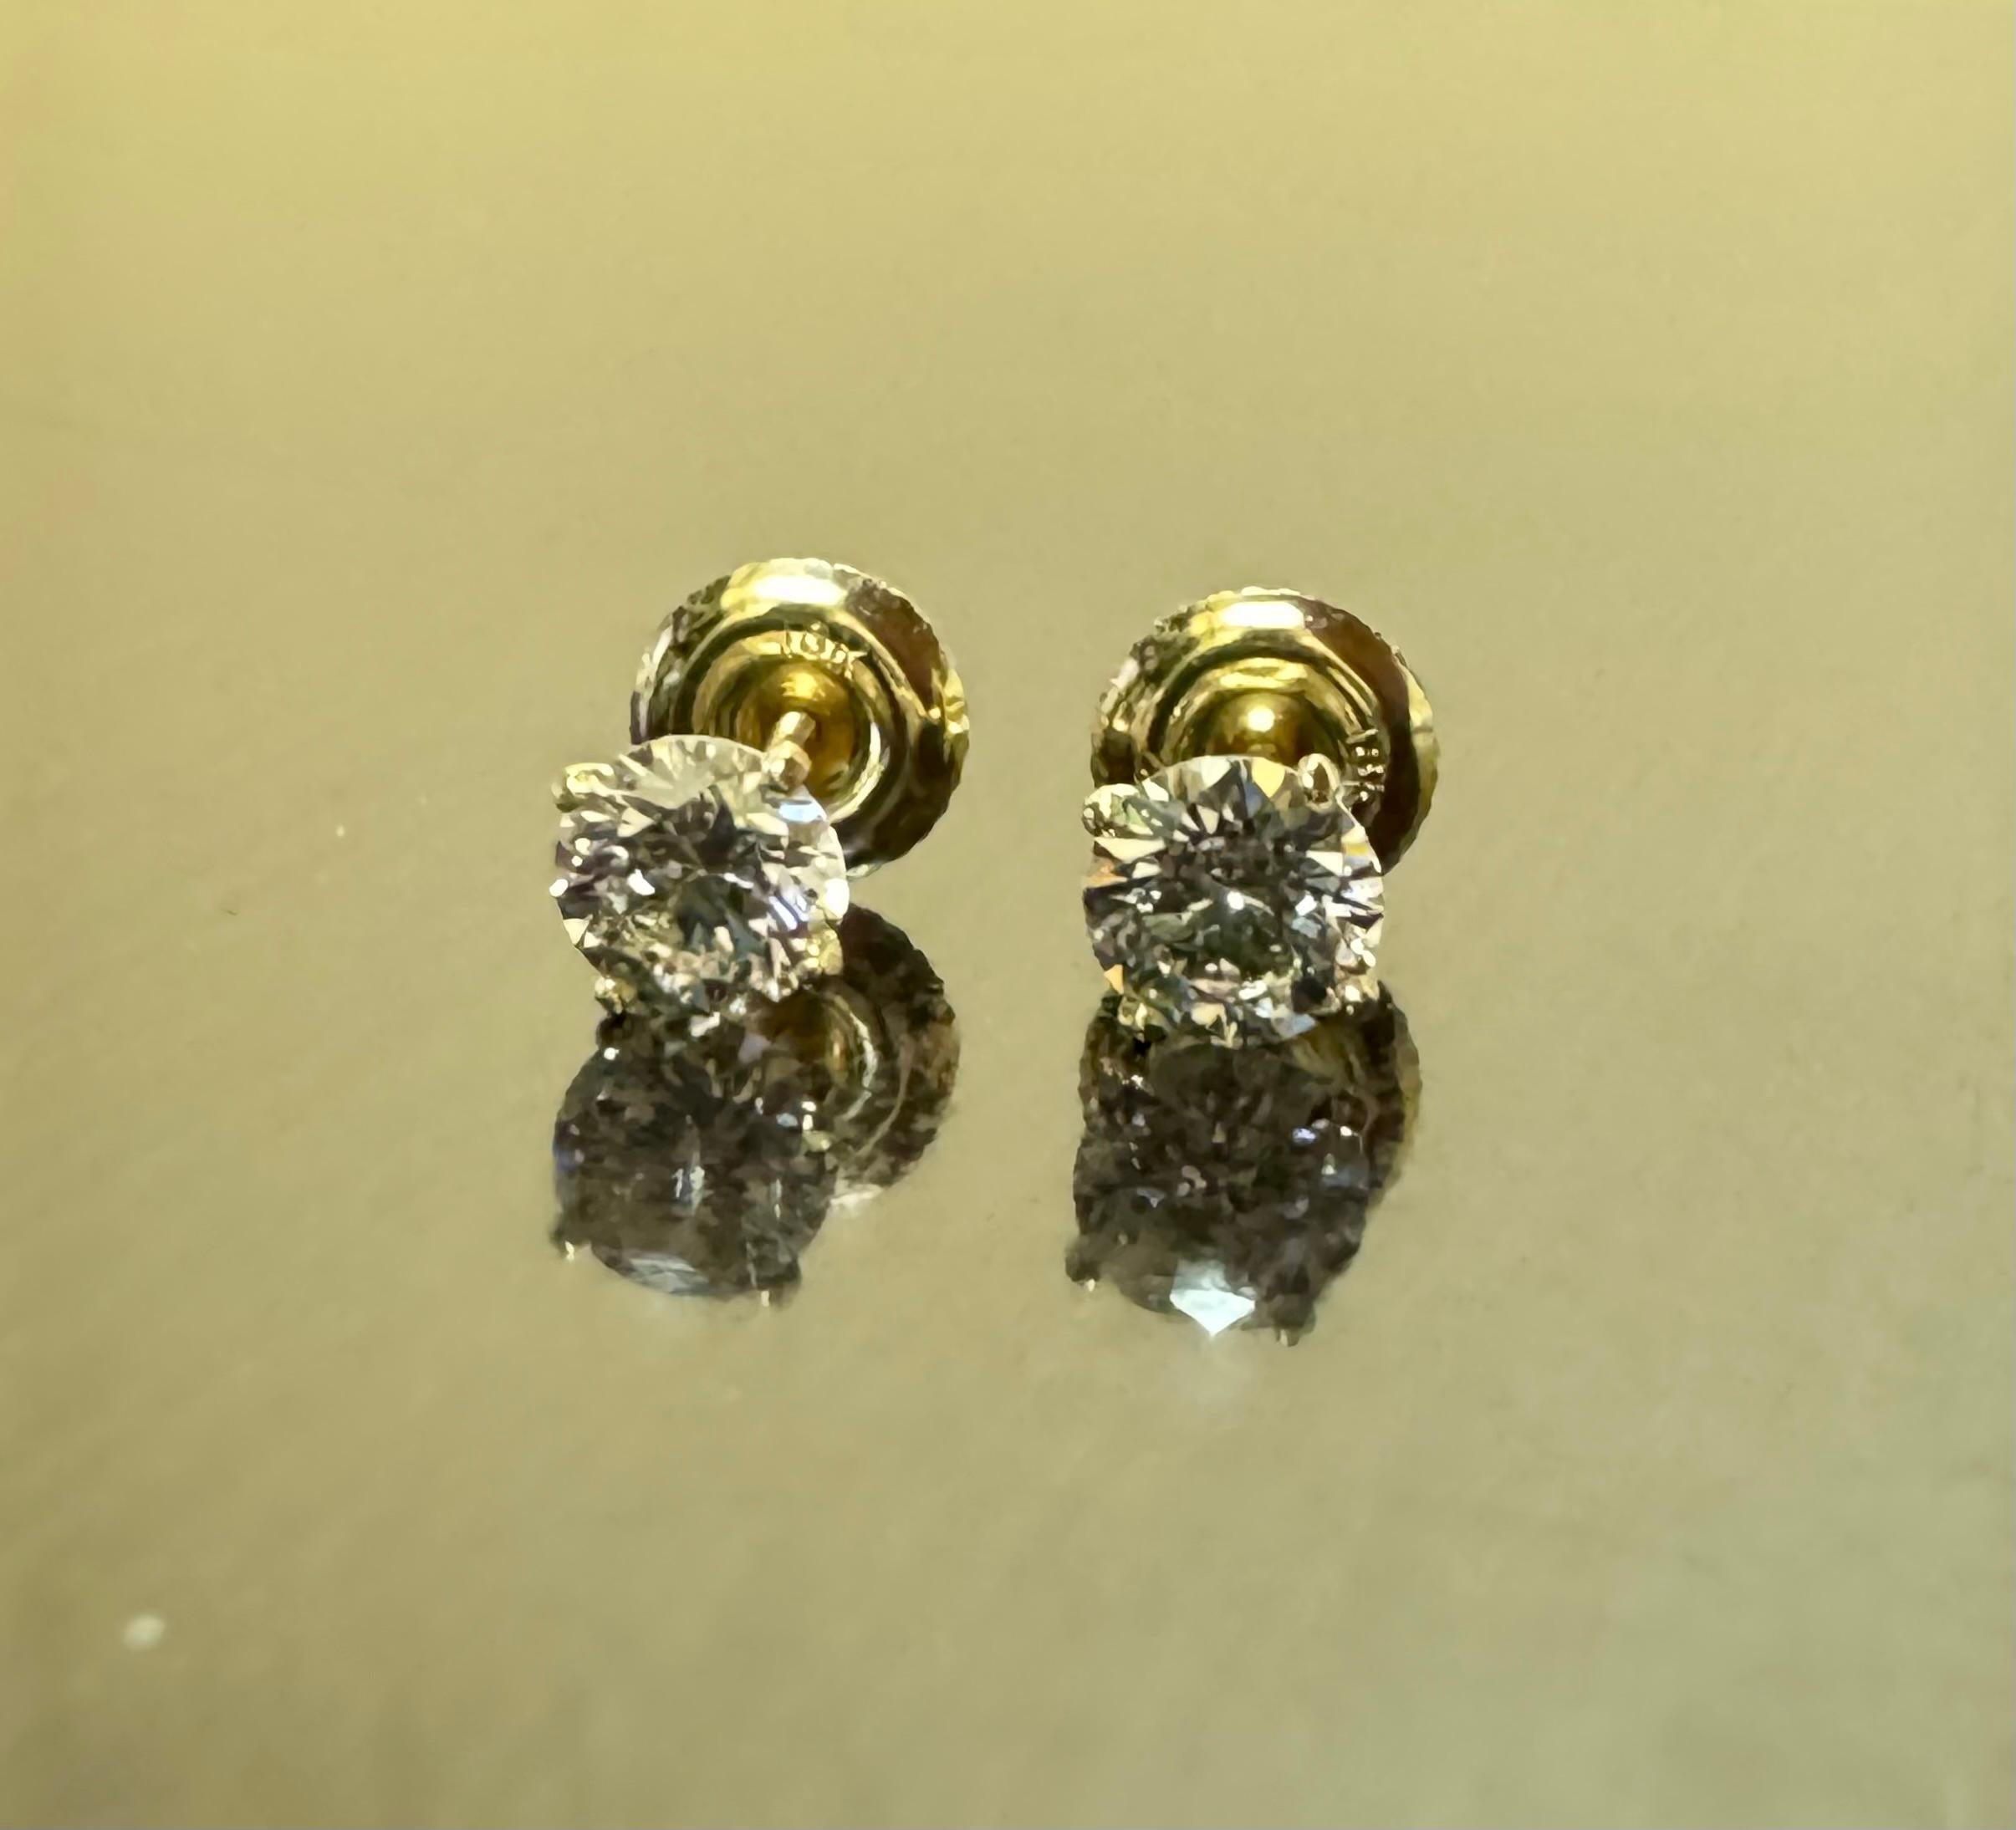 DeKara Designs Classic

Metal- 18K Yellow Gold, .750.

Stones- 2 GIA Certified Round Diamonds, 1 H Color VS1 Clarity 0.54 Carats, 1 H Color VS1 Clarity 0.53 Carats. Both Diamonds are Laser Insribed.

Earrings Come With GIA Diamond Dossiers
0.57 H